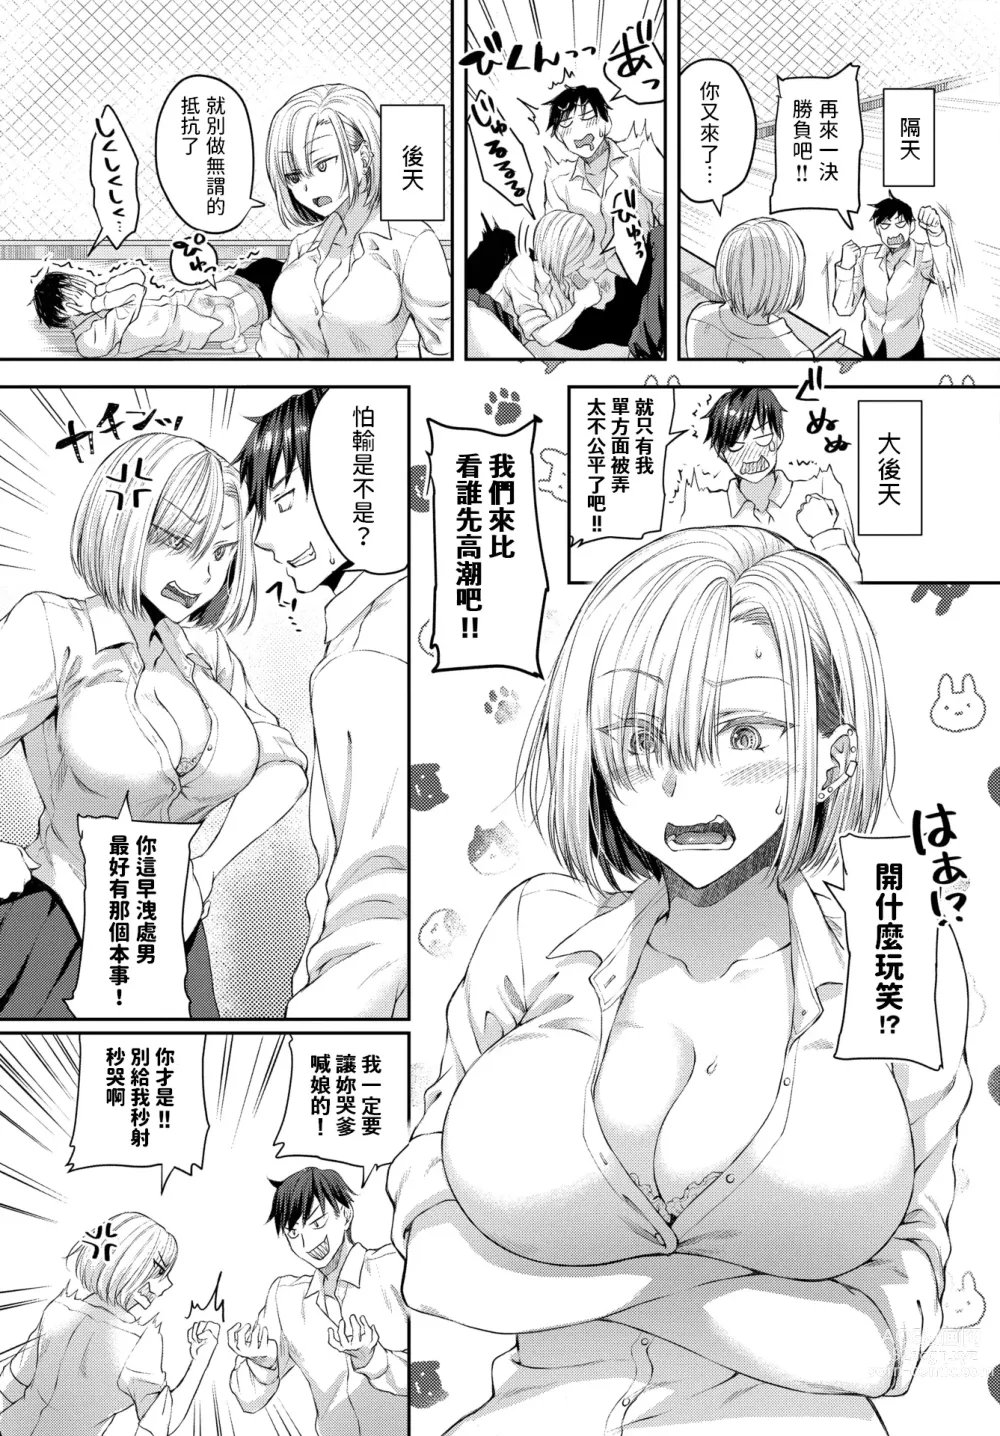 Page 7 of doujinshi 屋上ランデブー